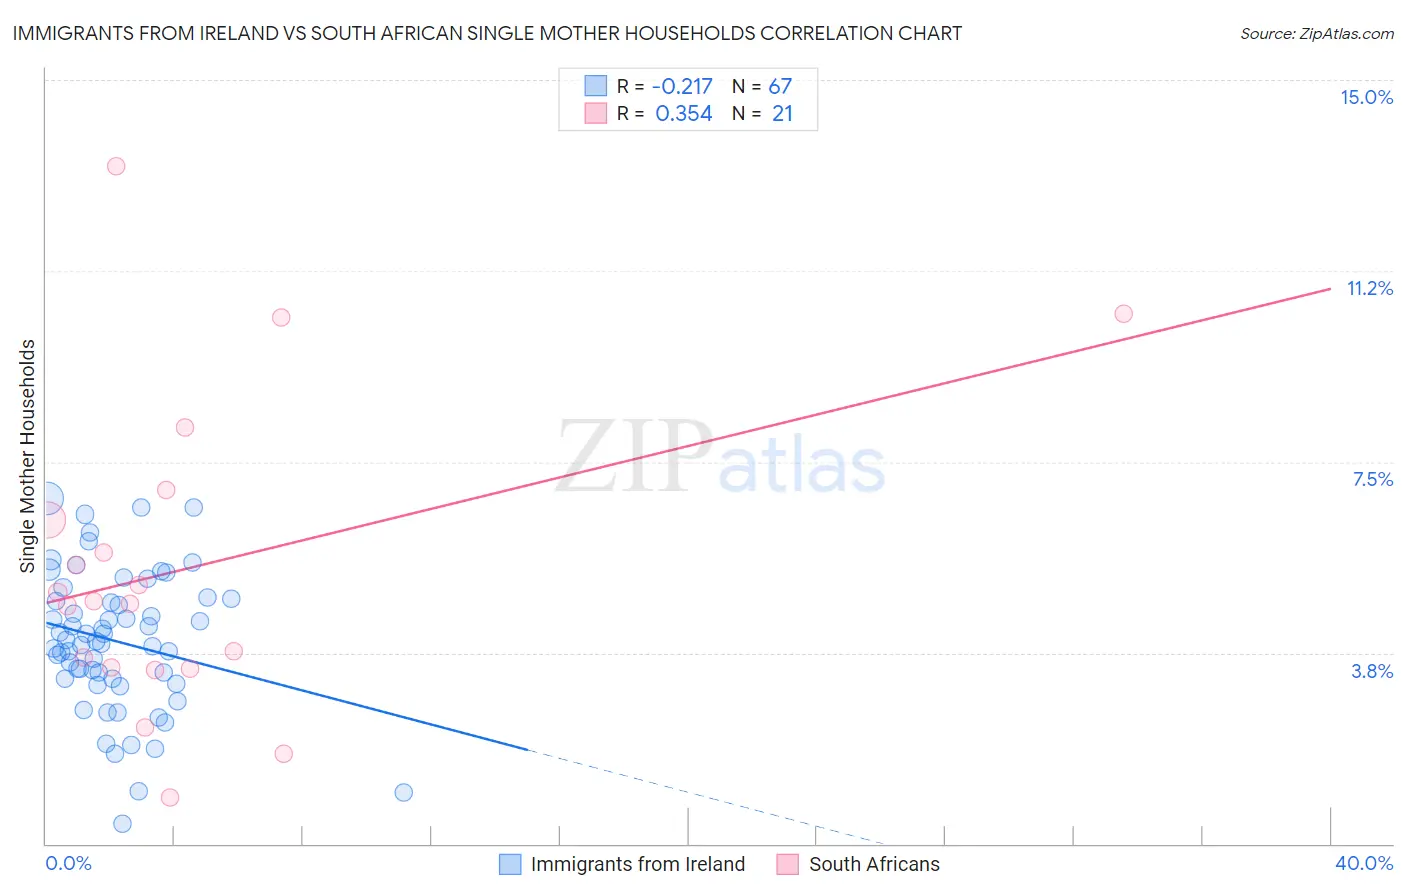 Immigrants from Ireland vs South African Single Mother Households